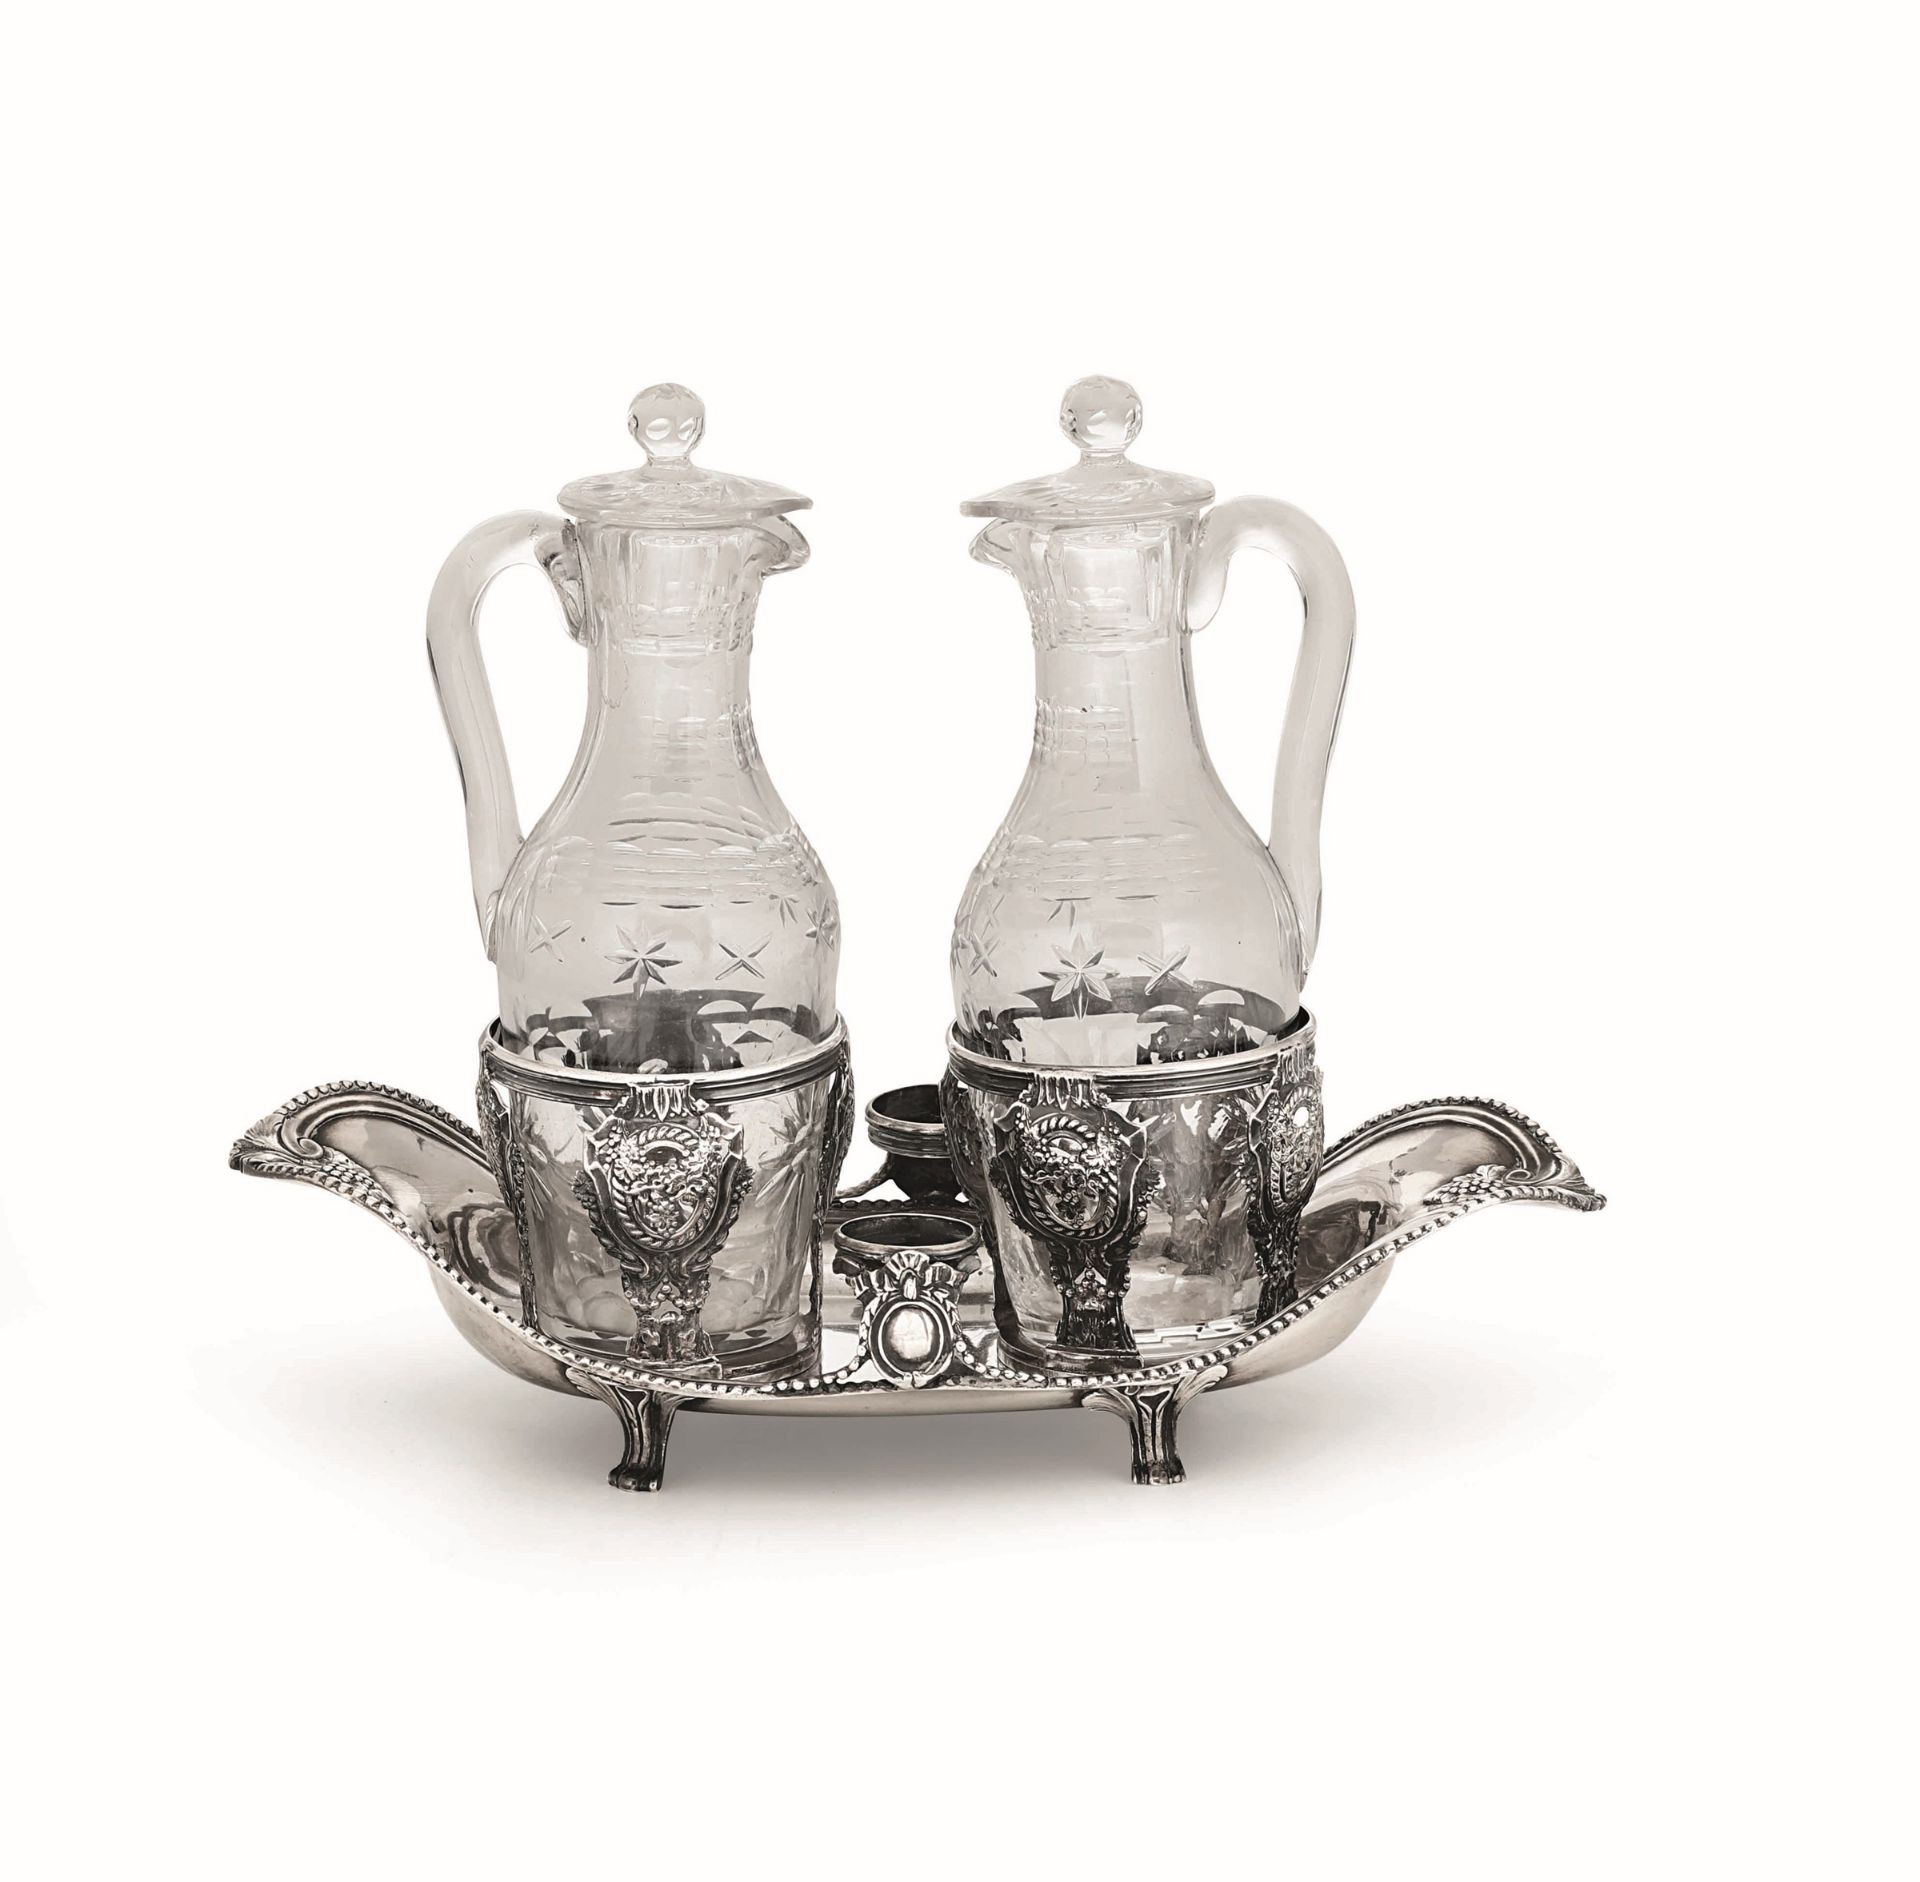 A silver cruet stand, France, late 1700s - Molten, embossed and chiselled silver with [...]